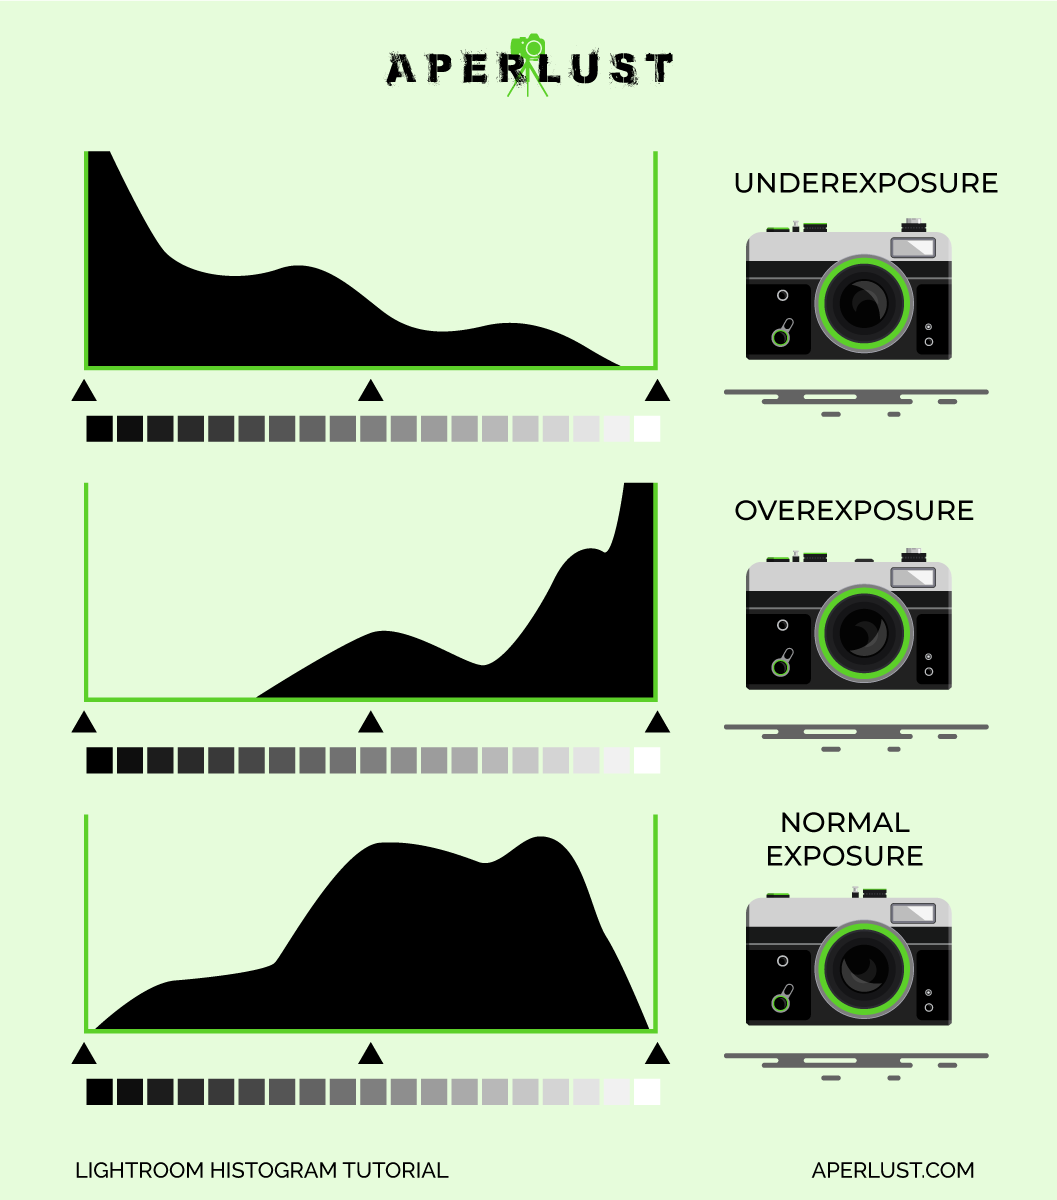 Lightroom Histogram graphs with cameras - What should a histogram look like?